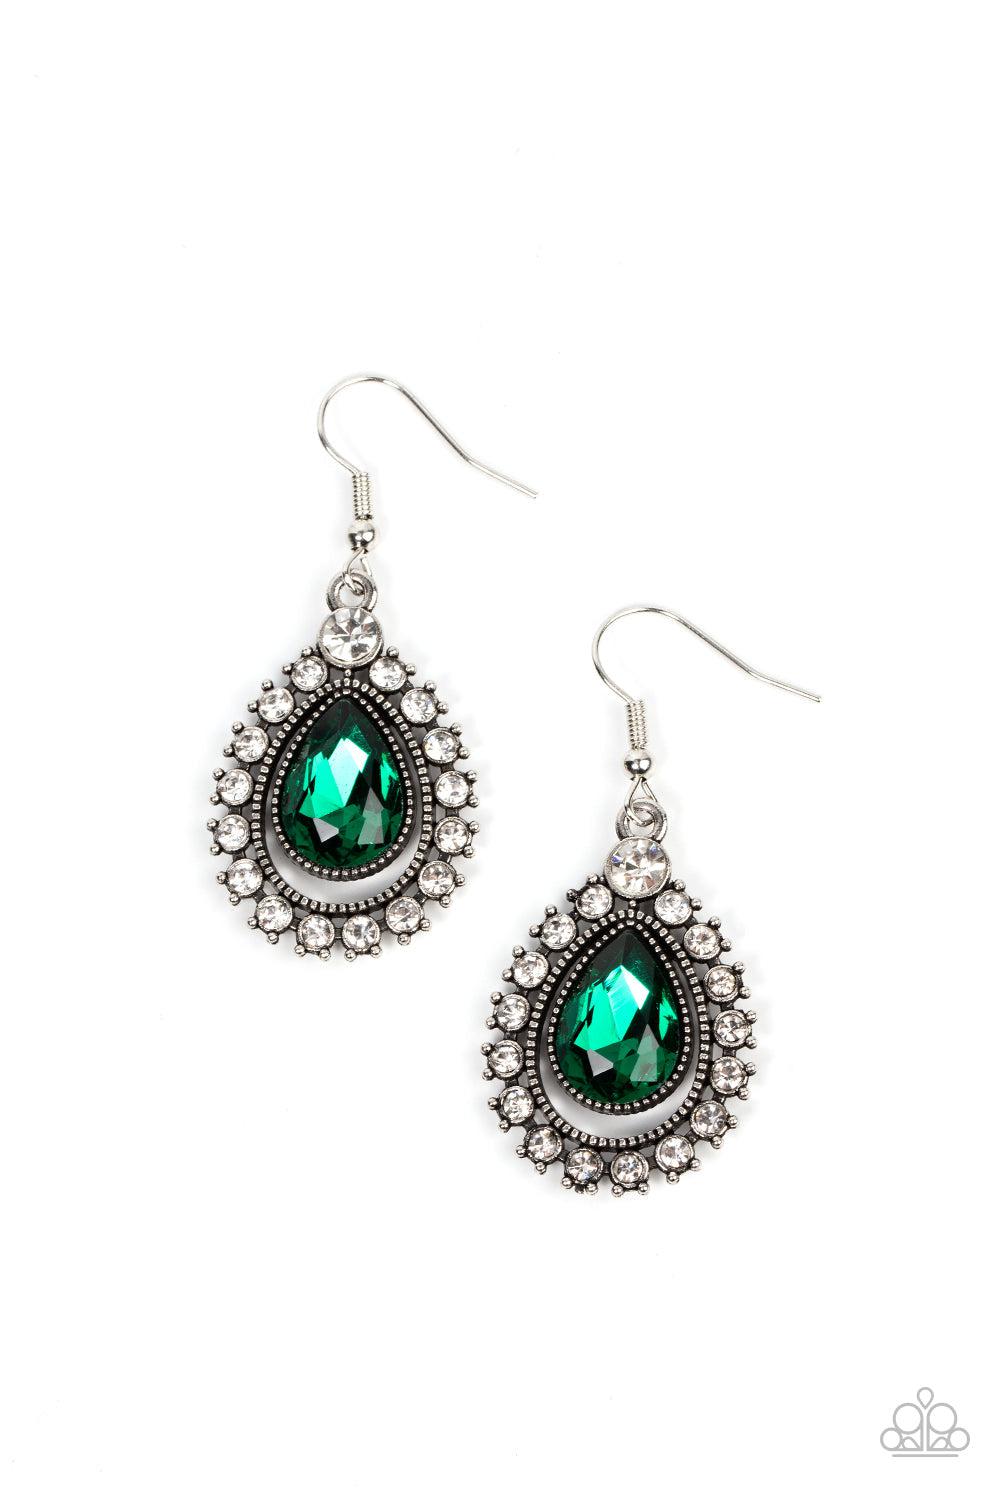 Divinely Duchess Green Rhinestone Earrings - Paparazzi Accessories- lightbox - CarasShop.com - $5 Jewelry by Cara Jewels